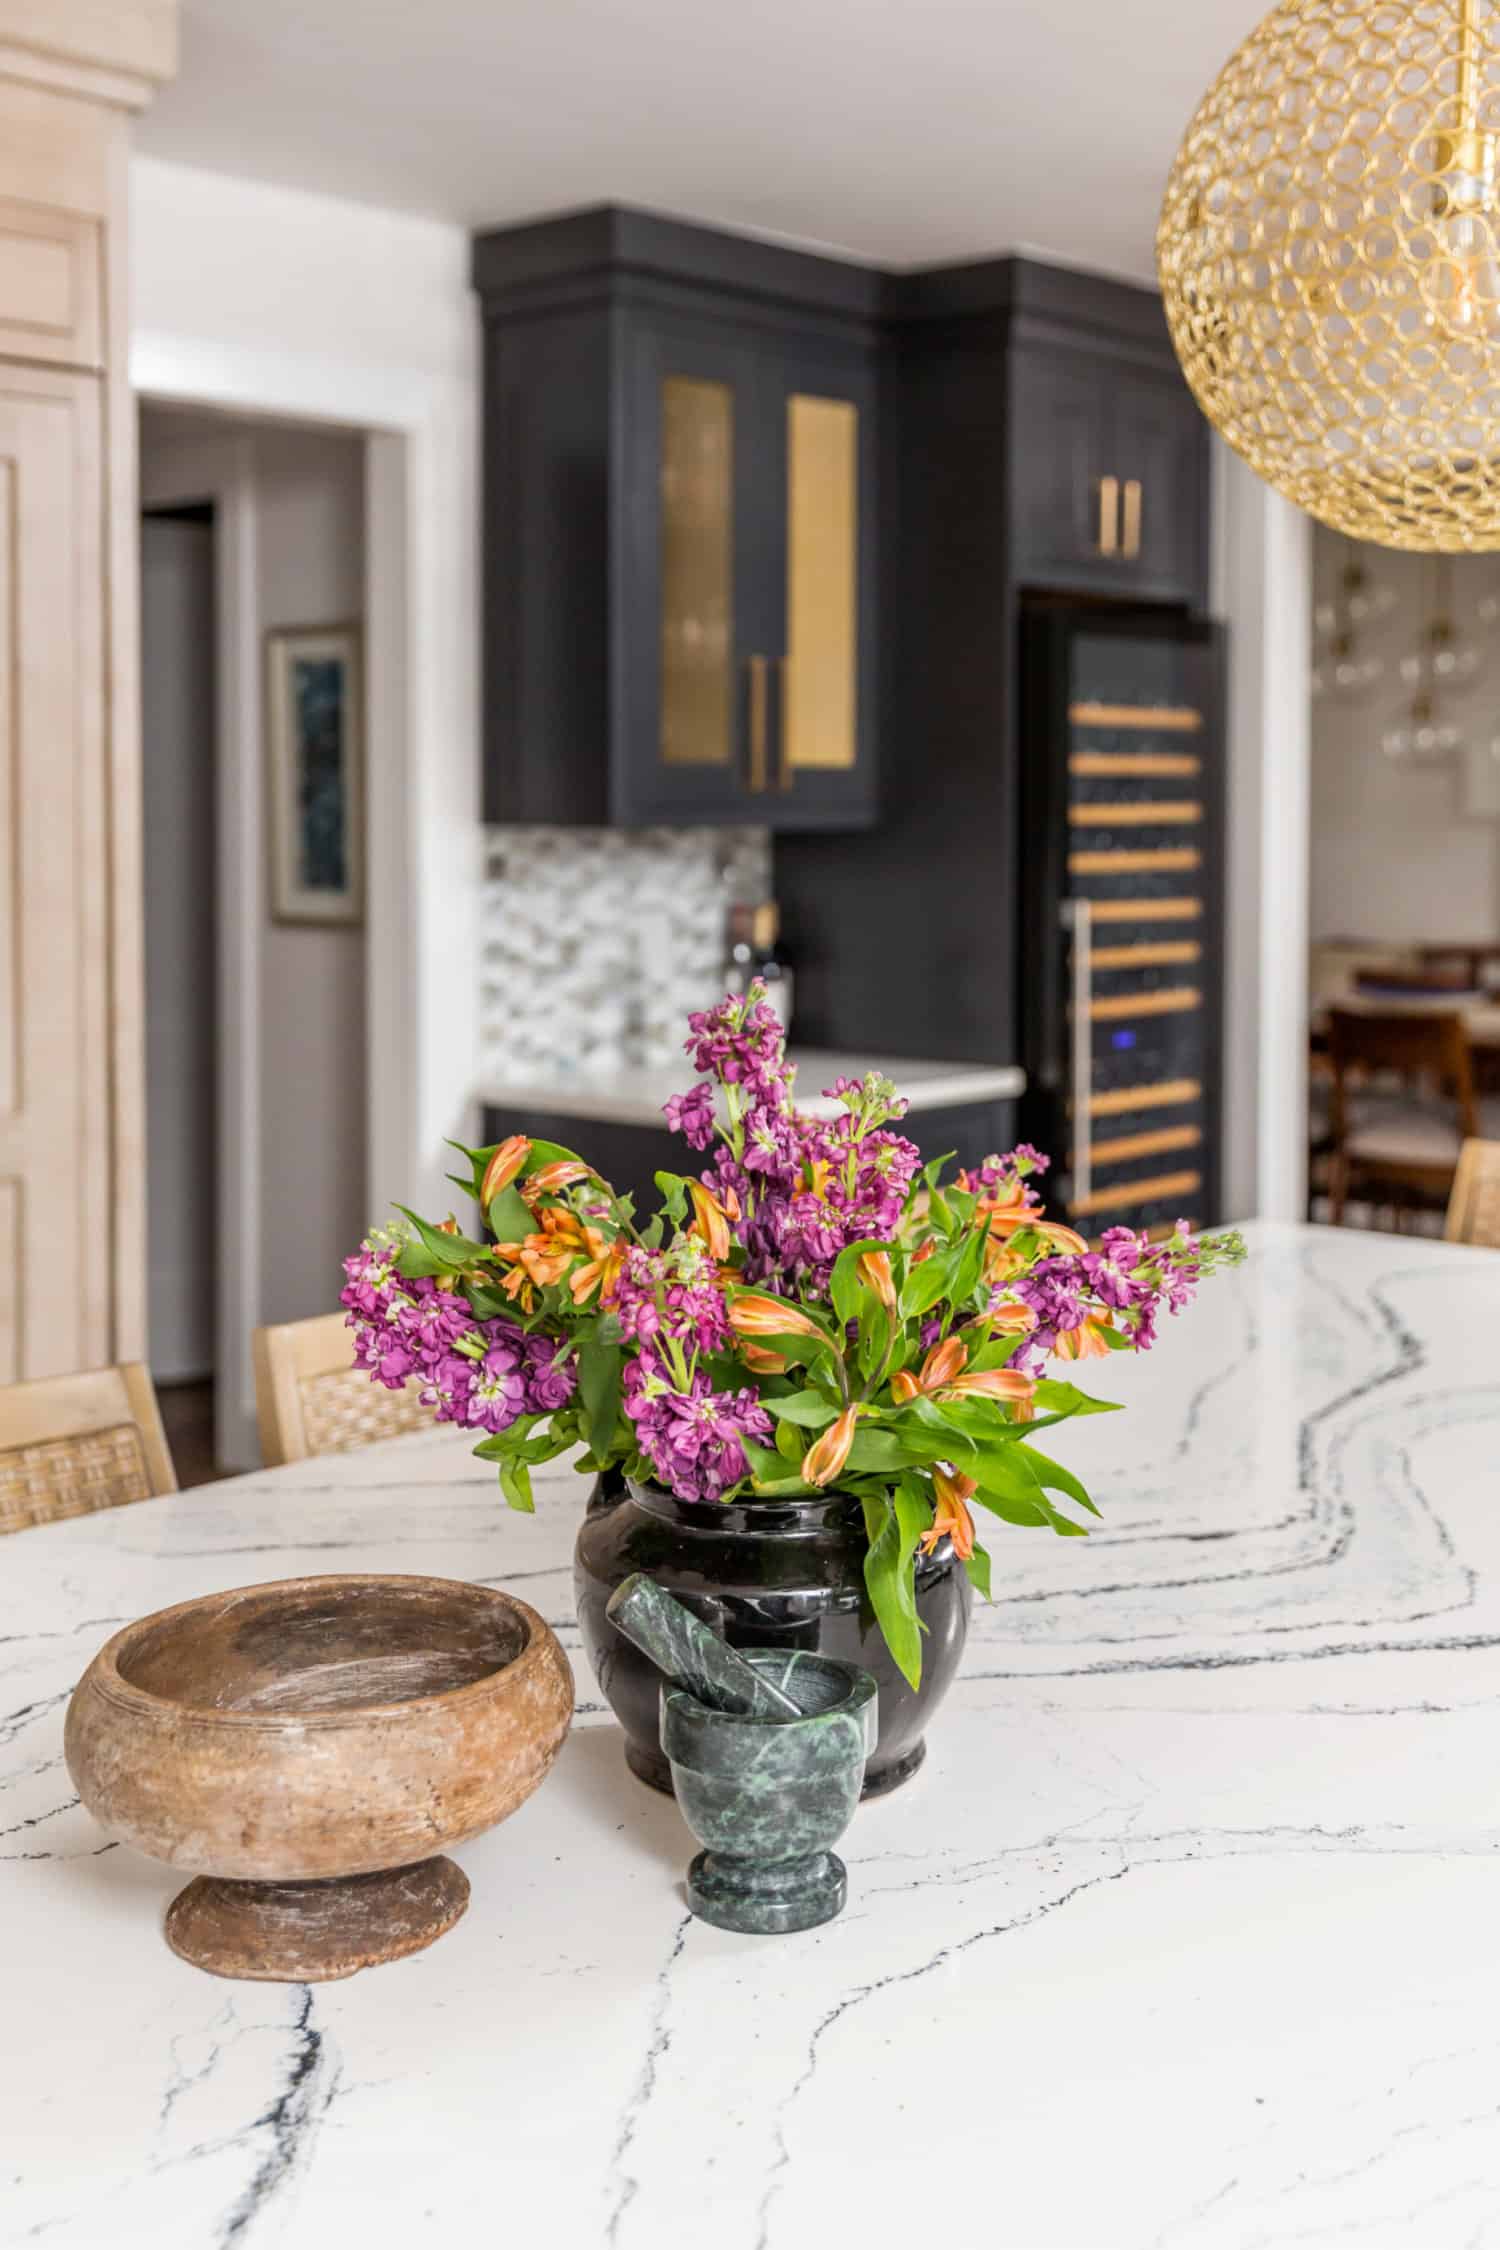 Nicholas Design Build | A remodeled kitchen with a marble counter top and a vase of flowers.